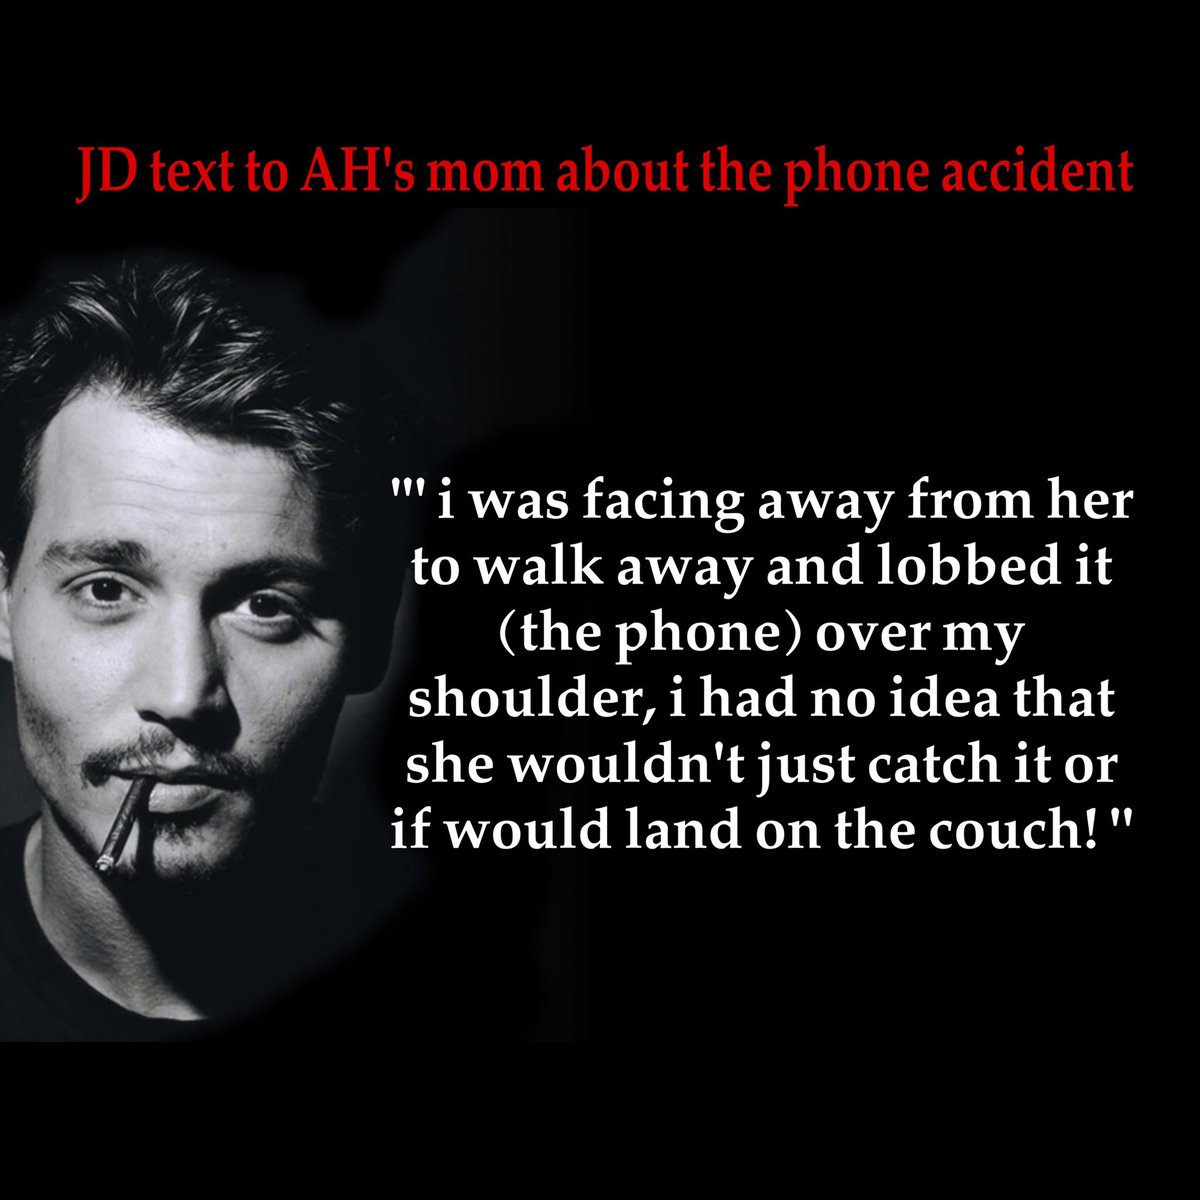 Yeah the liar one is Johnny depp who admitted he throw the phone.#JohnnyDeppIsAWifeBeater